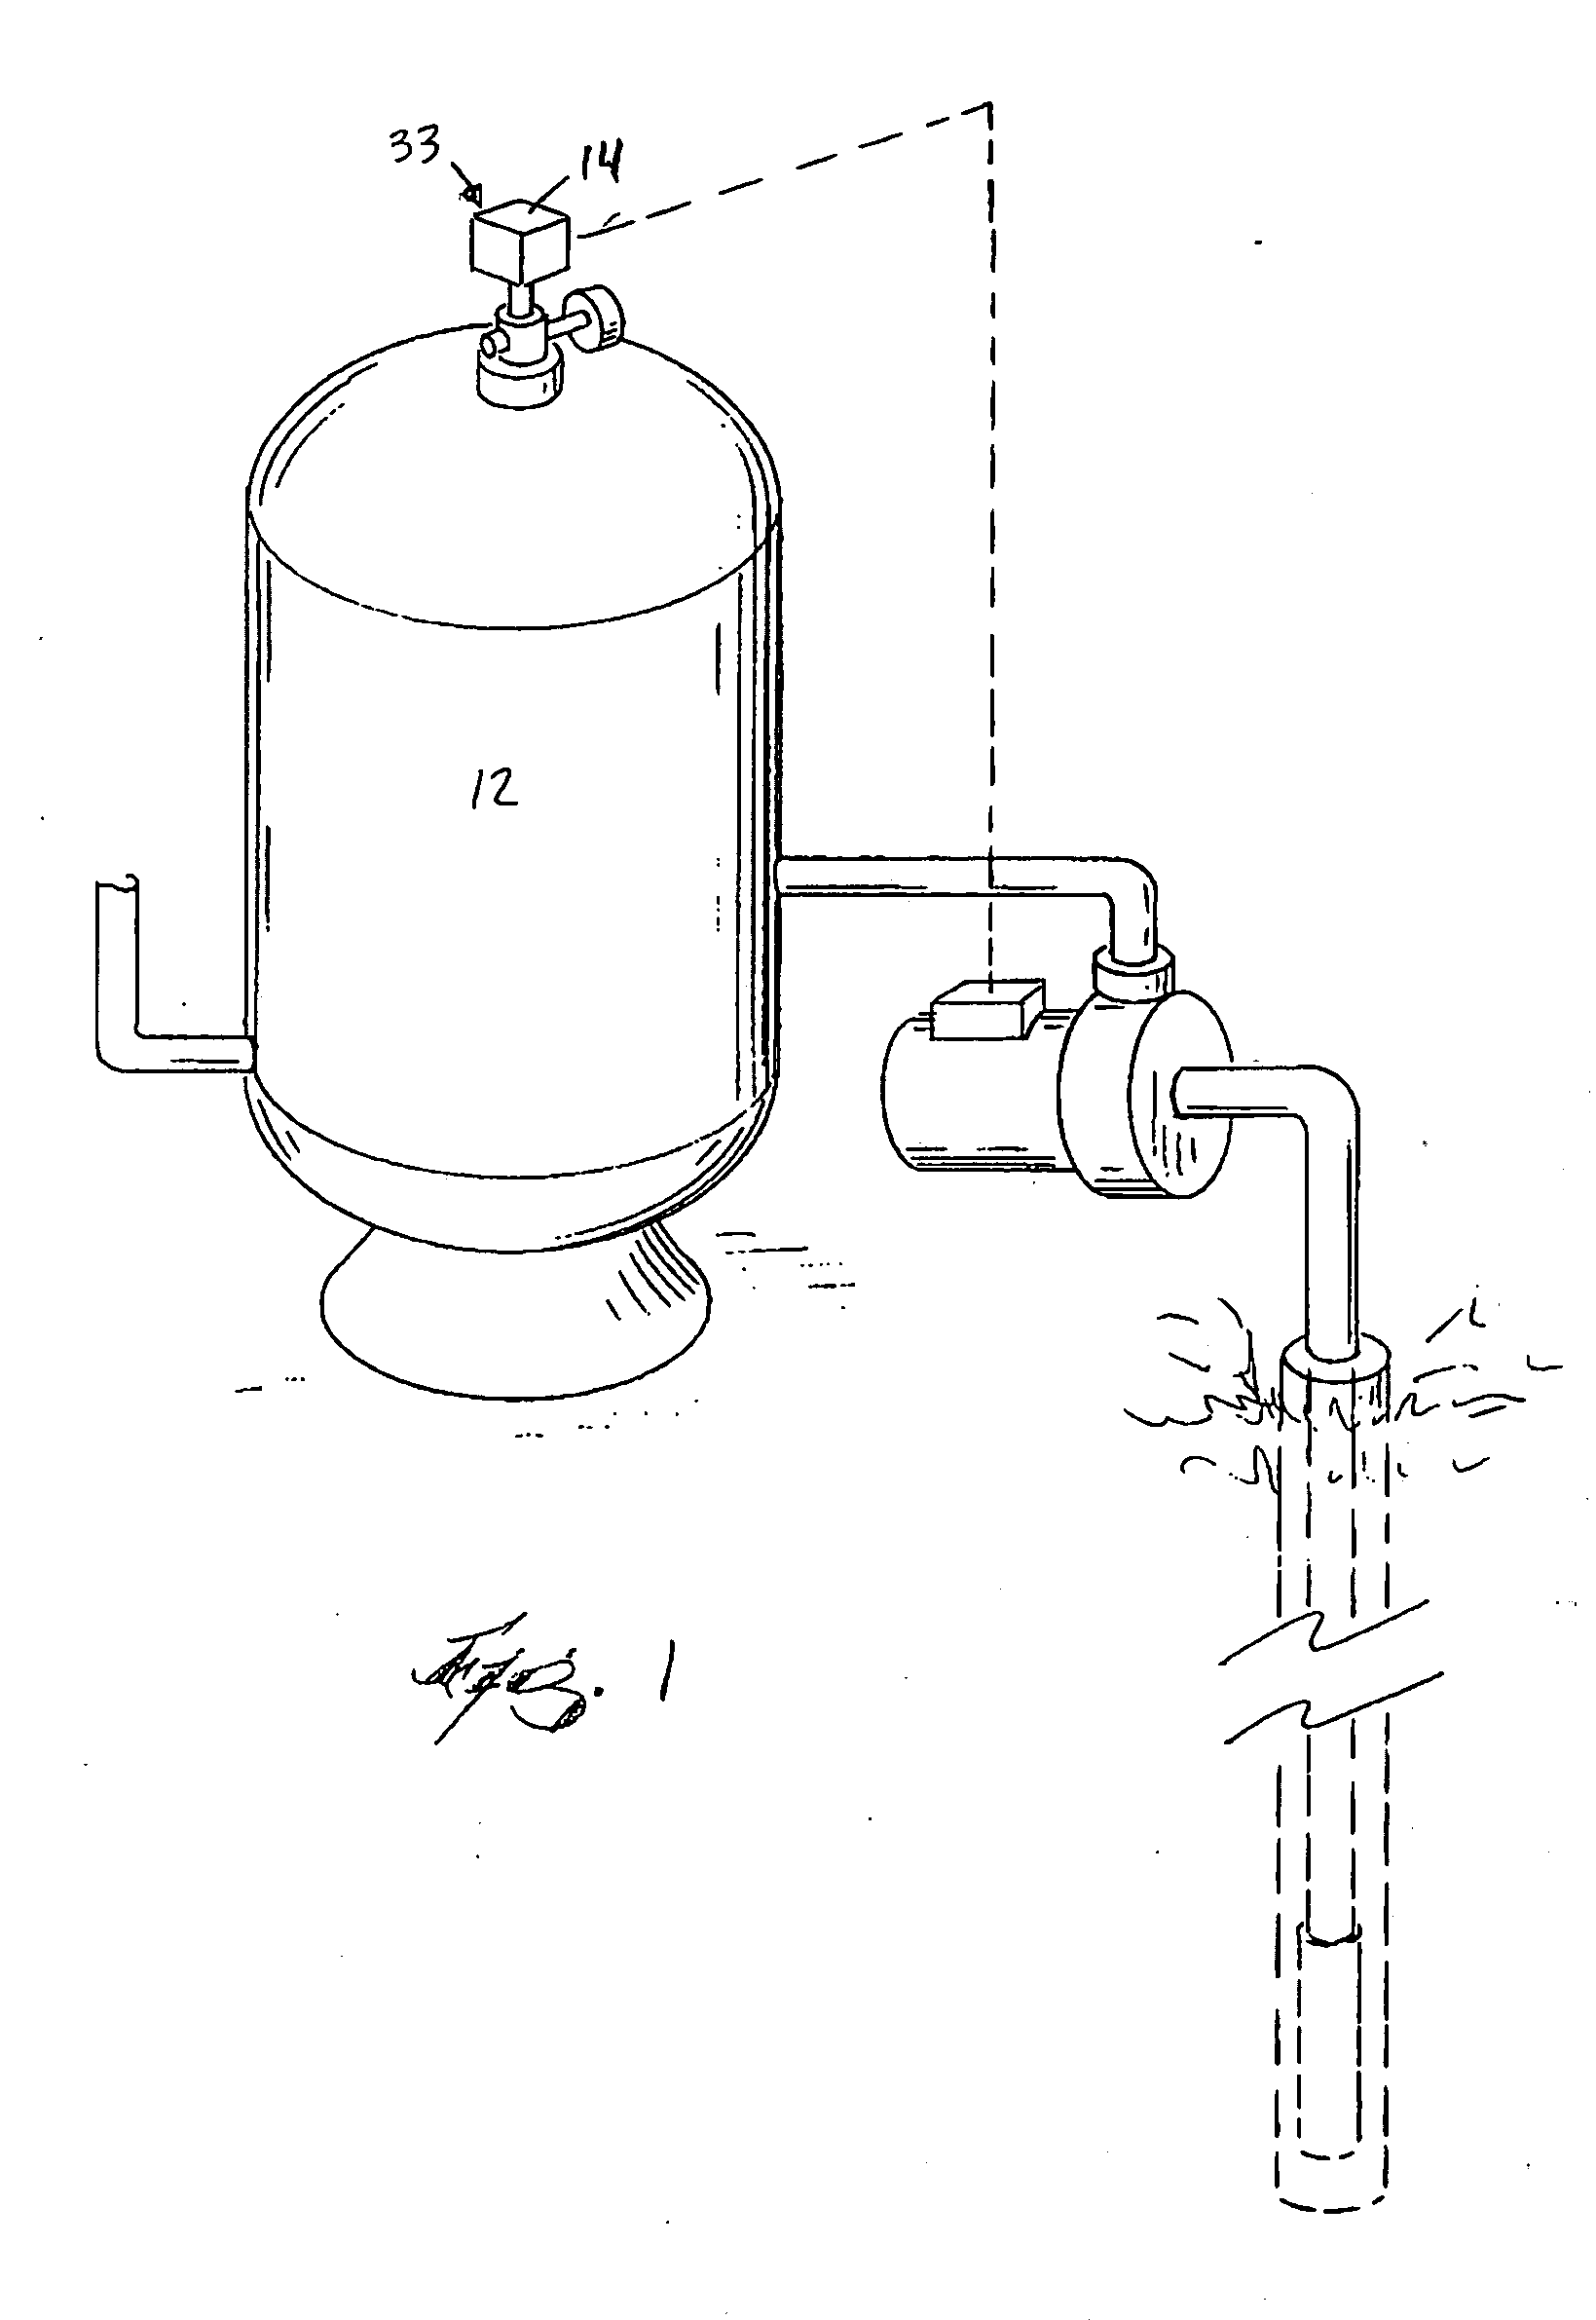 Apparatus and method for containing and regulating the pressure in a pressure vessel